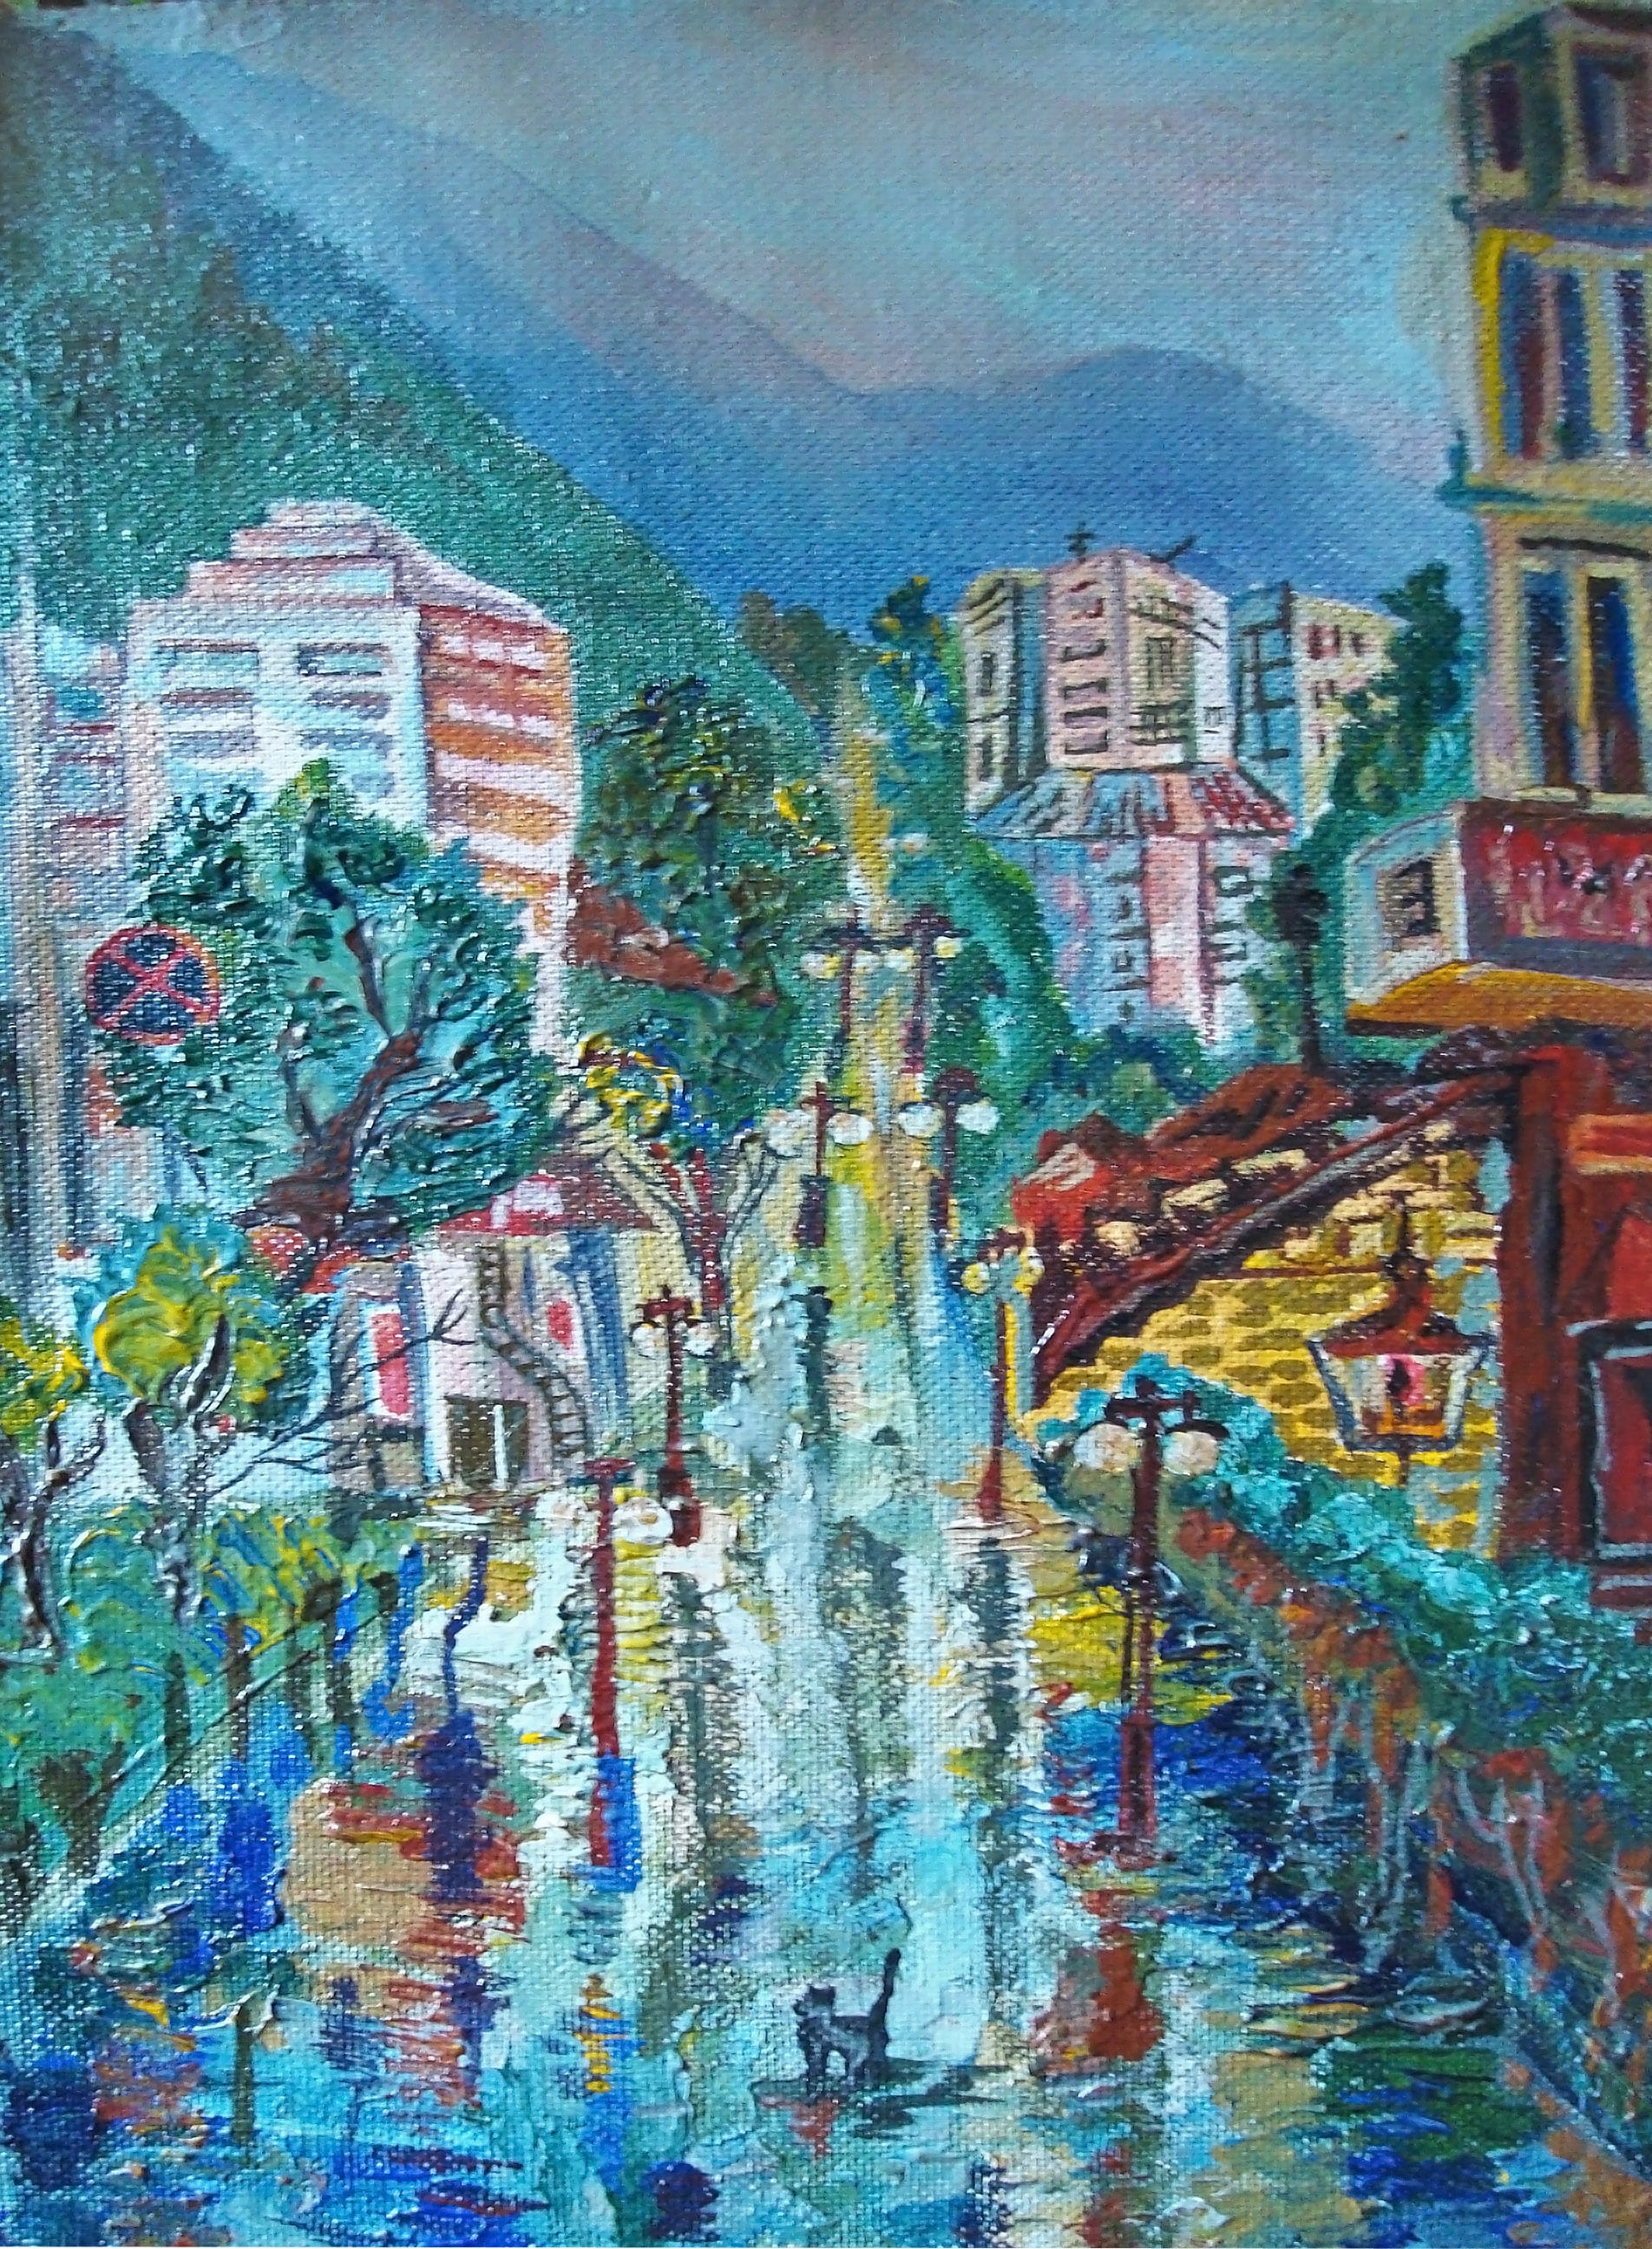 Painting of a Japanese Street after rain